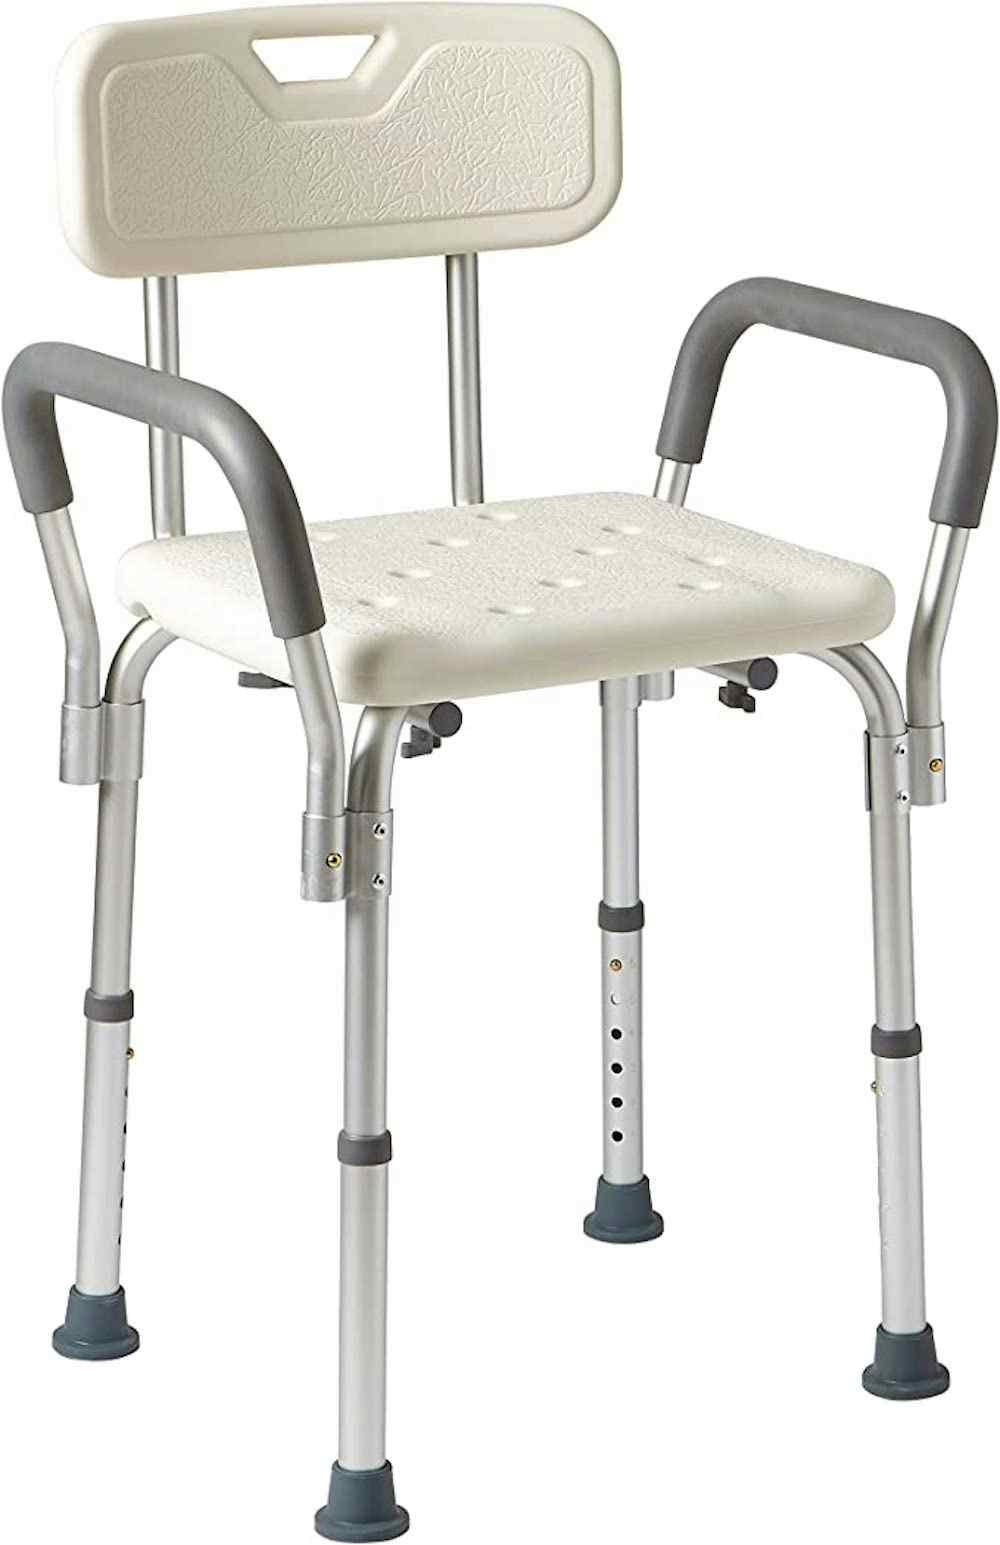 Medline Bath Bench with Back and Arms, MDS89745RAH, 1 Each